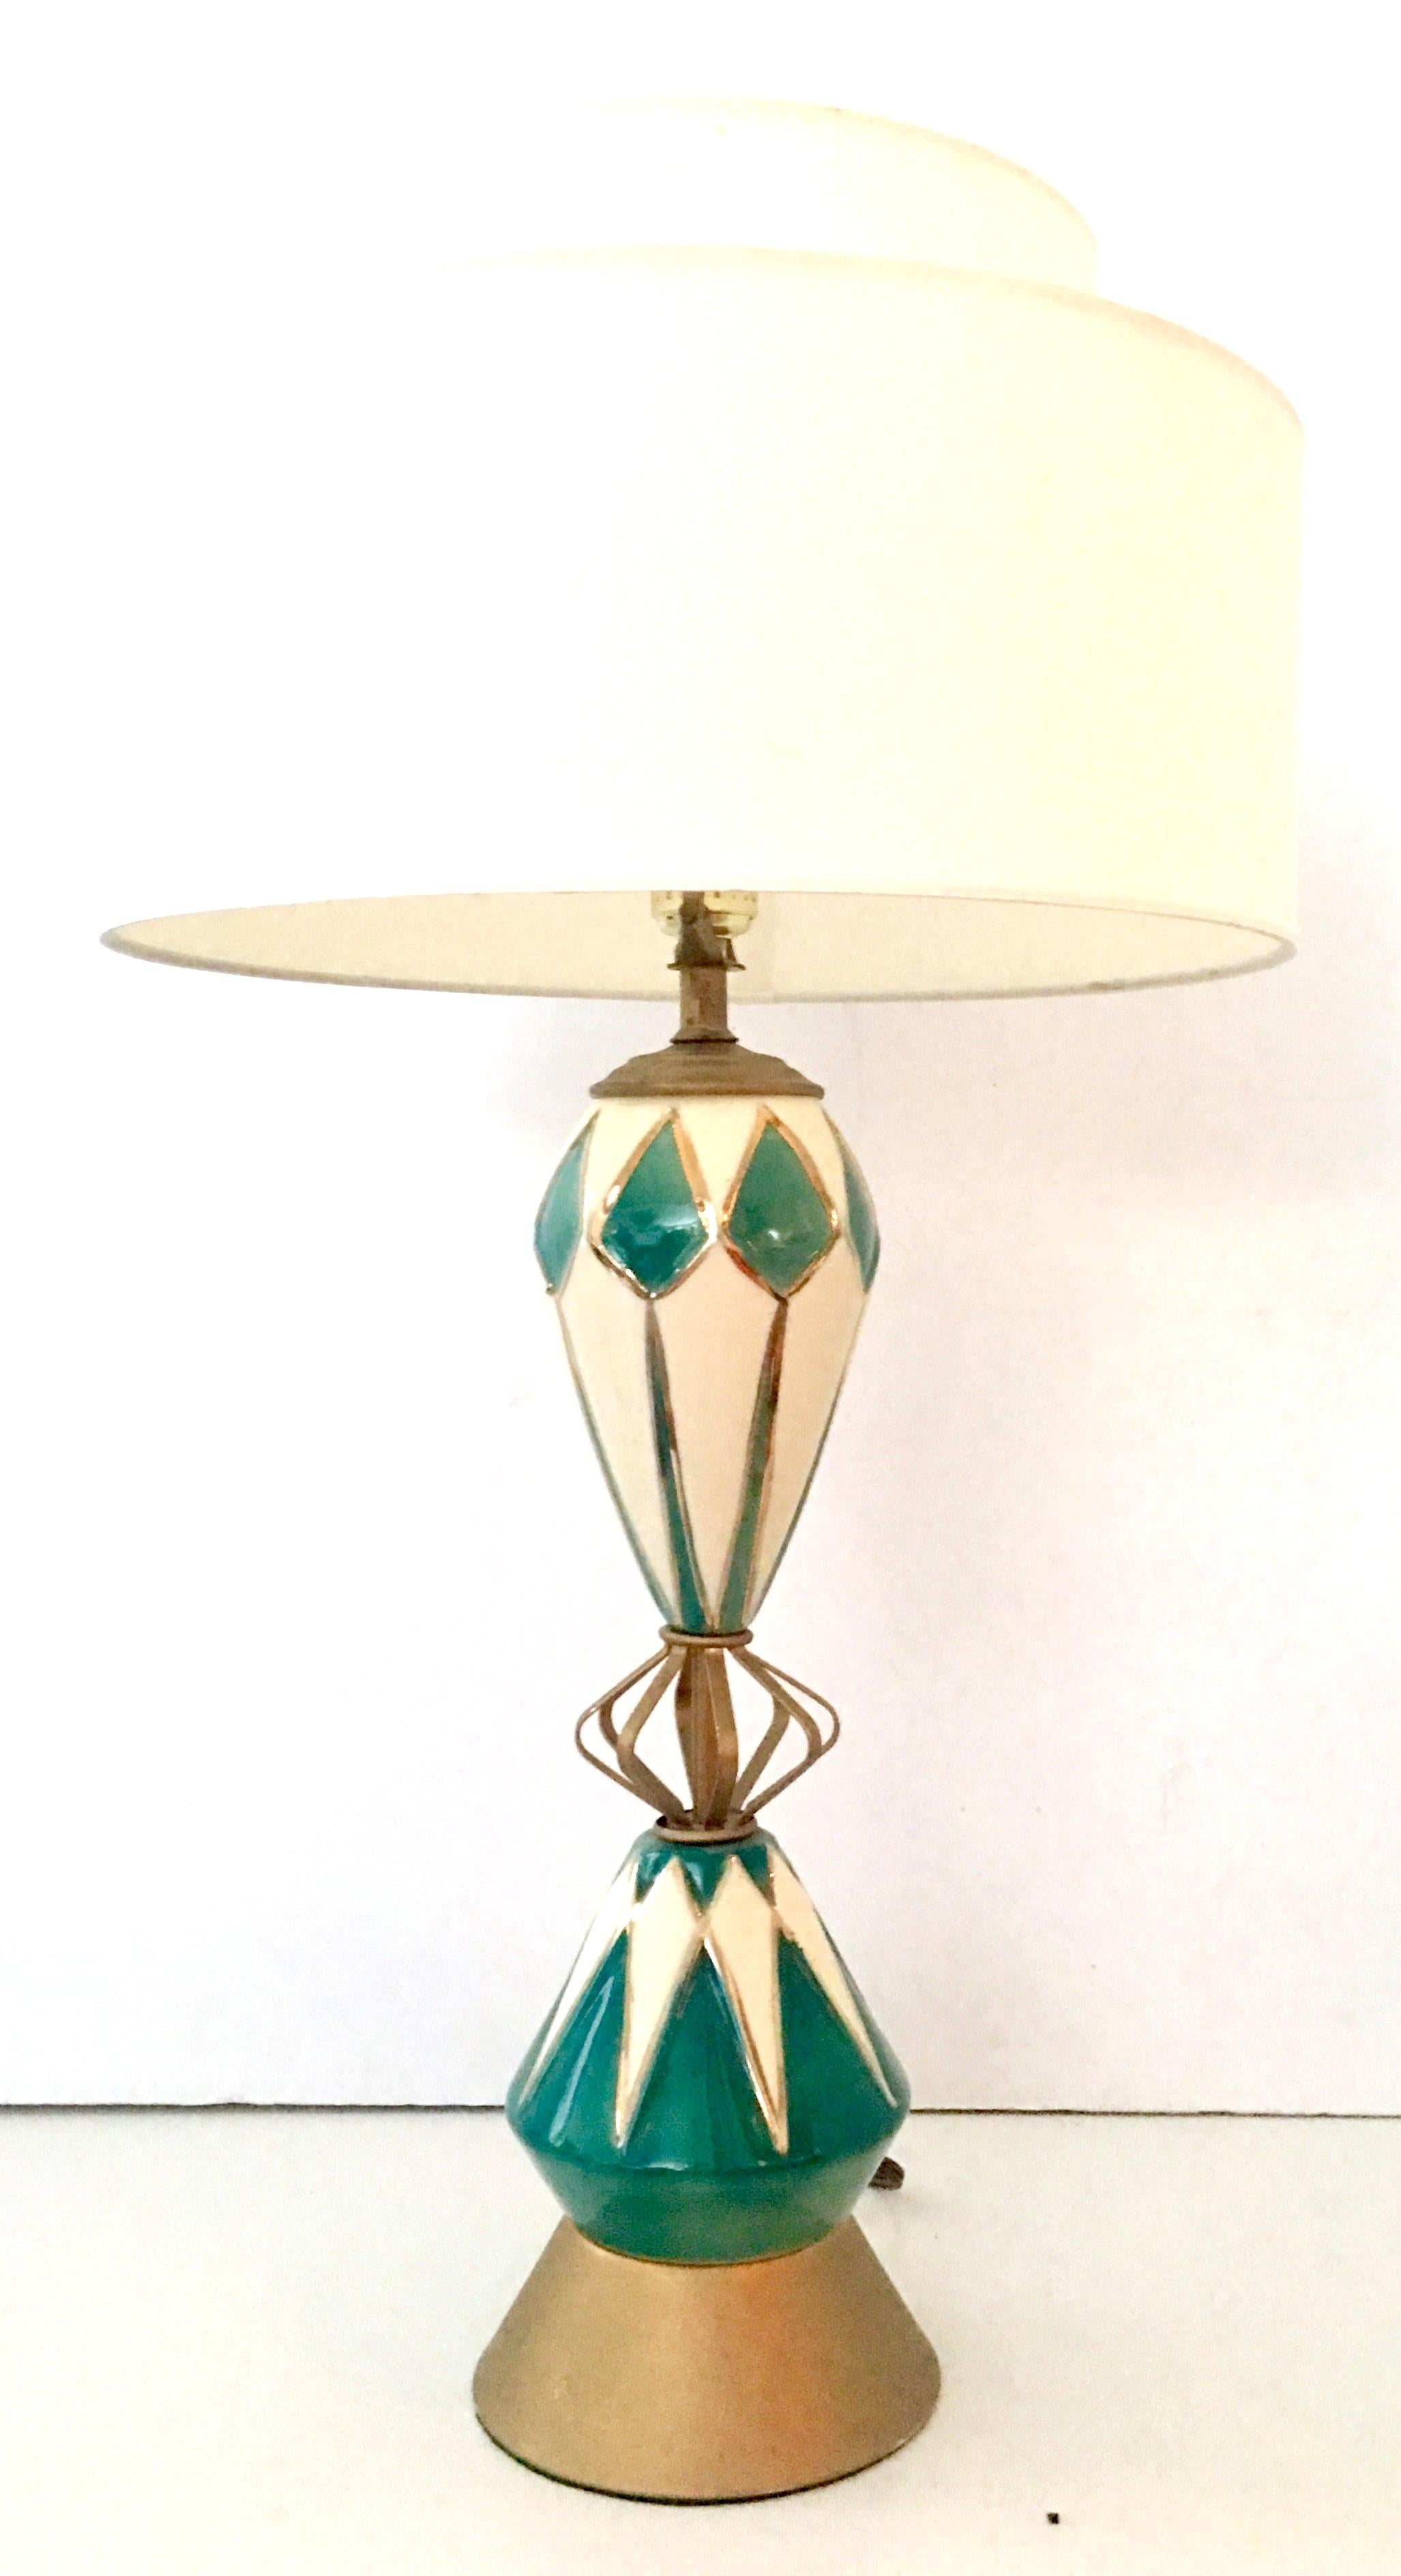 Quintessential Mid-Century Modern Atomic Sputnik ceramic glaze and brass table lamp. Features a teal green , off-white 